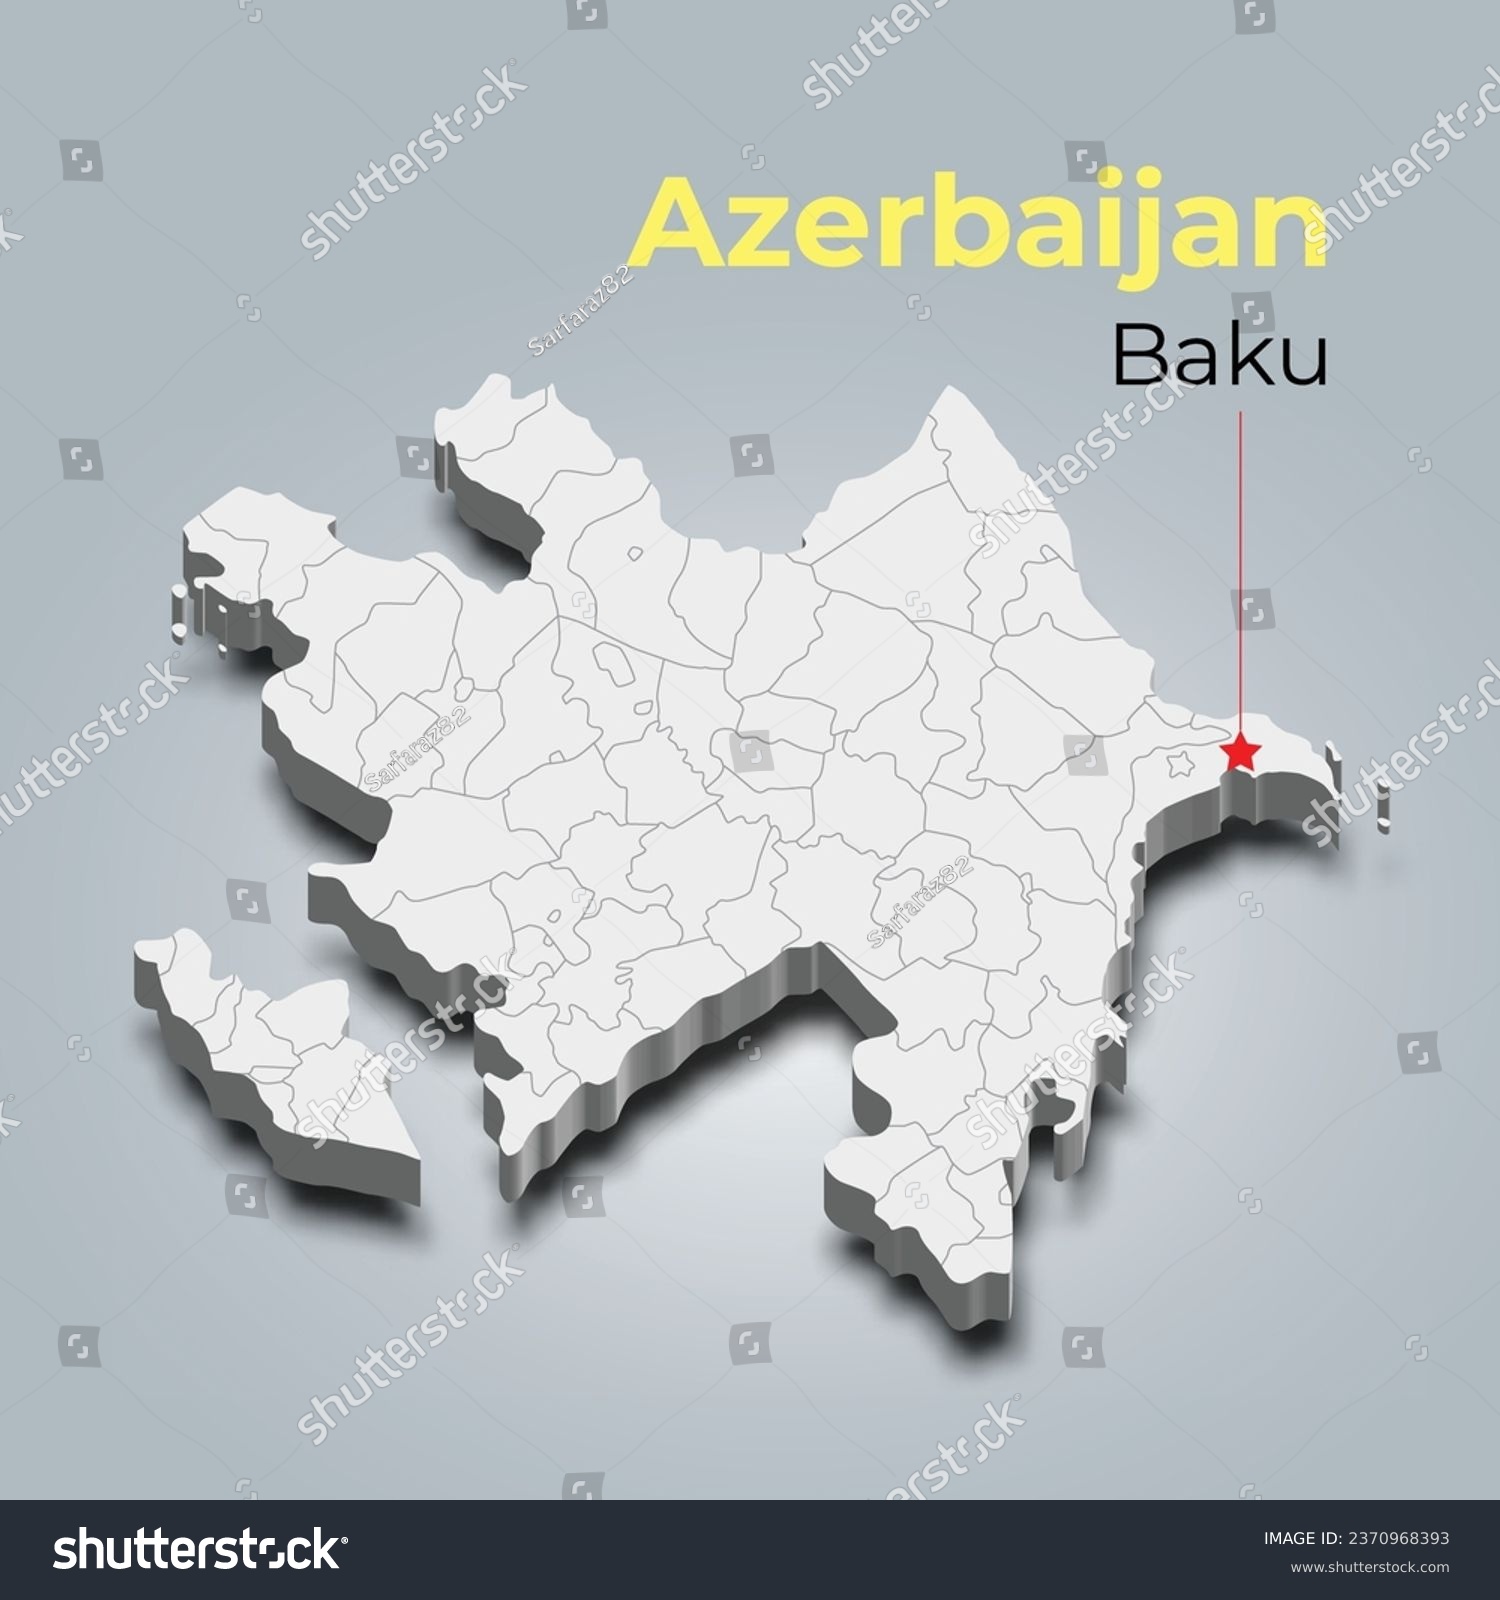 SVG of Azerbaijan 3d map with borders of regions and it’s capital svg